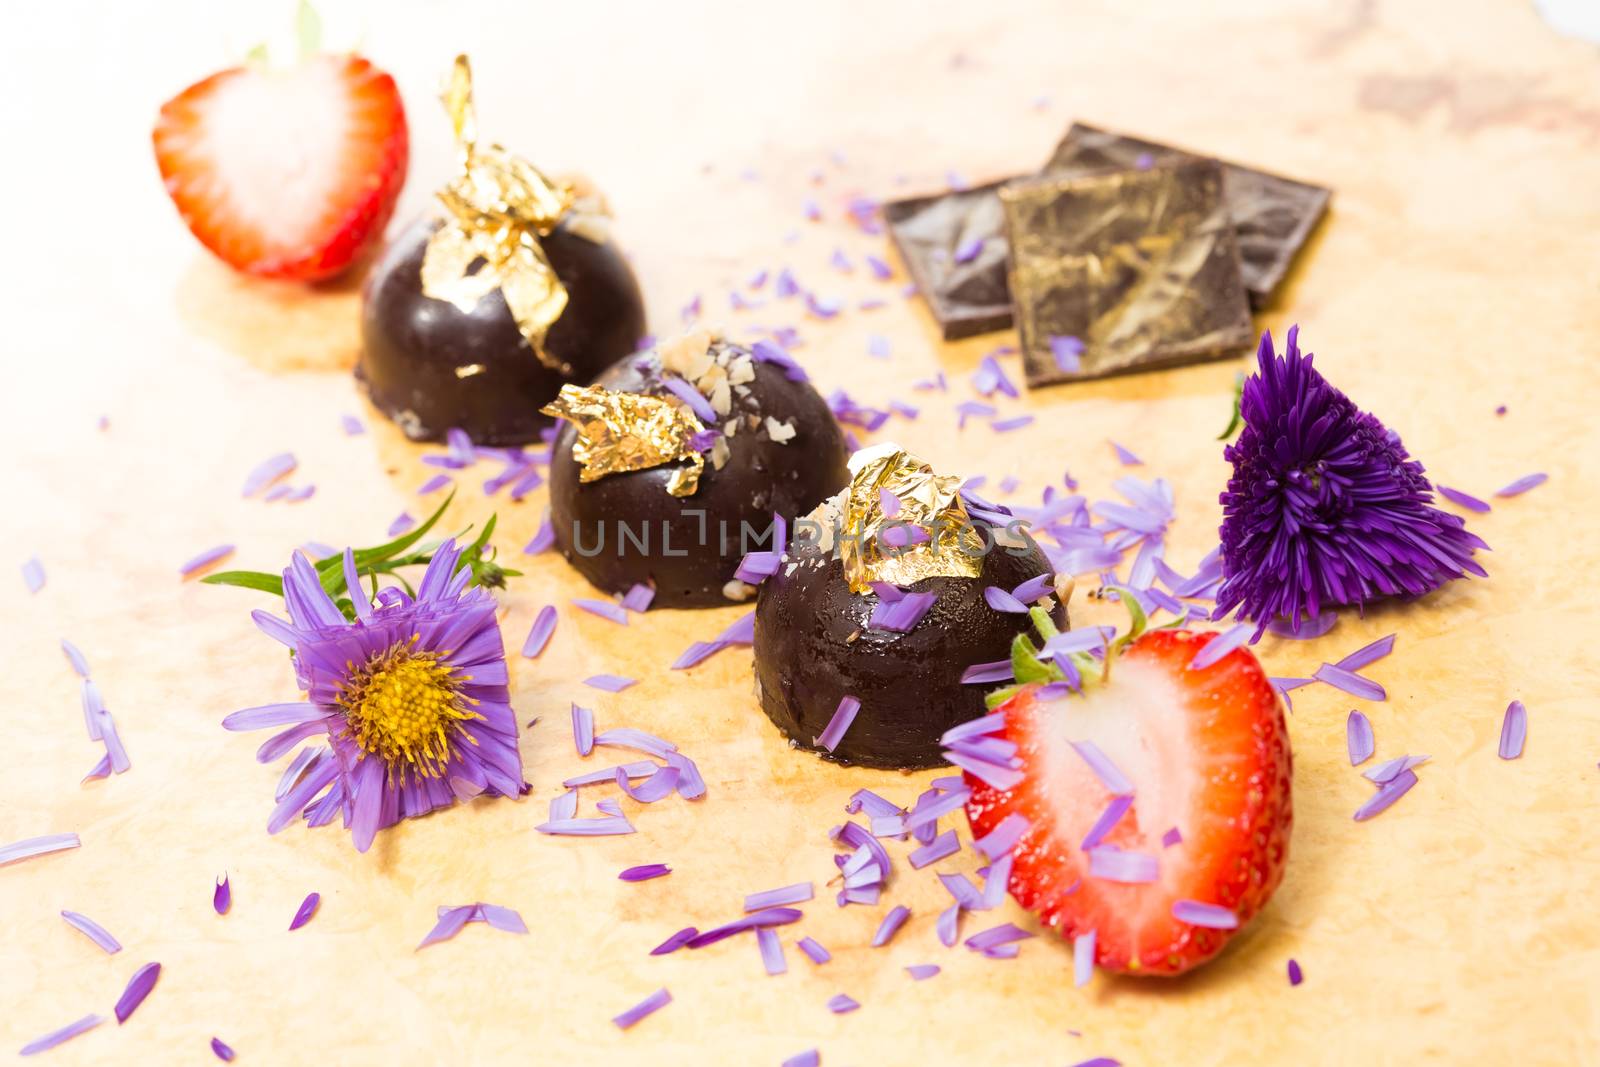 dark chocolate on a wooden table. Decorated with gold leaf. selective Focus